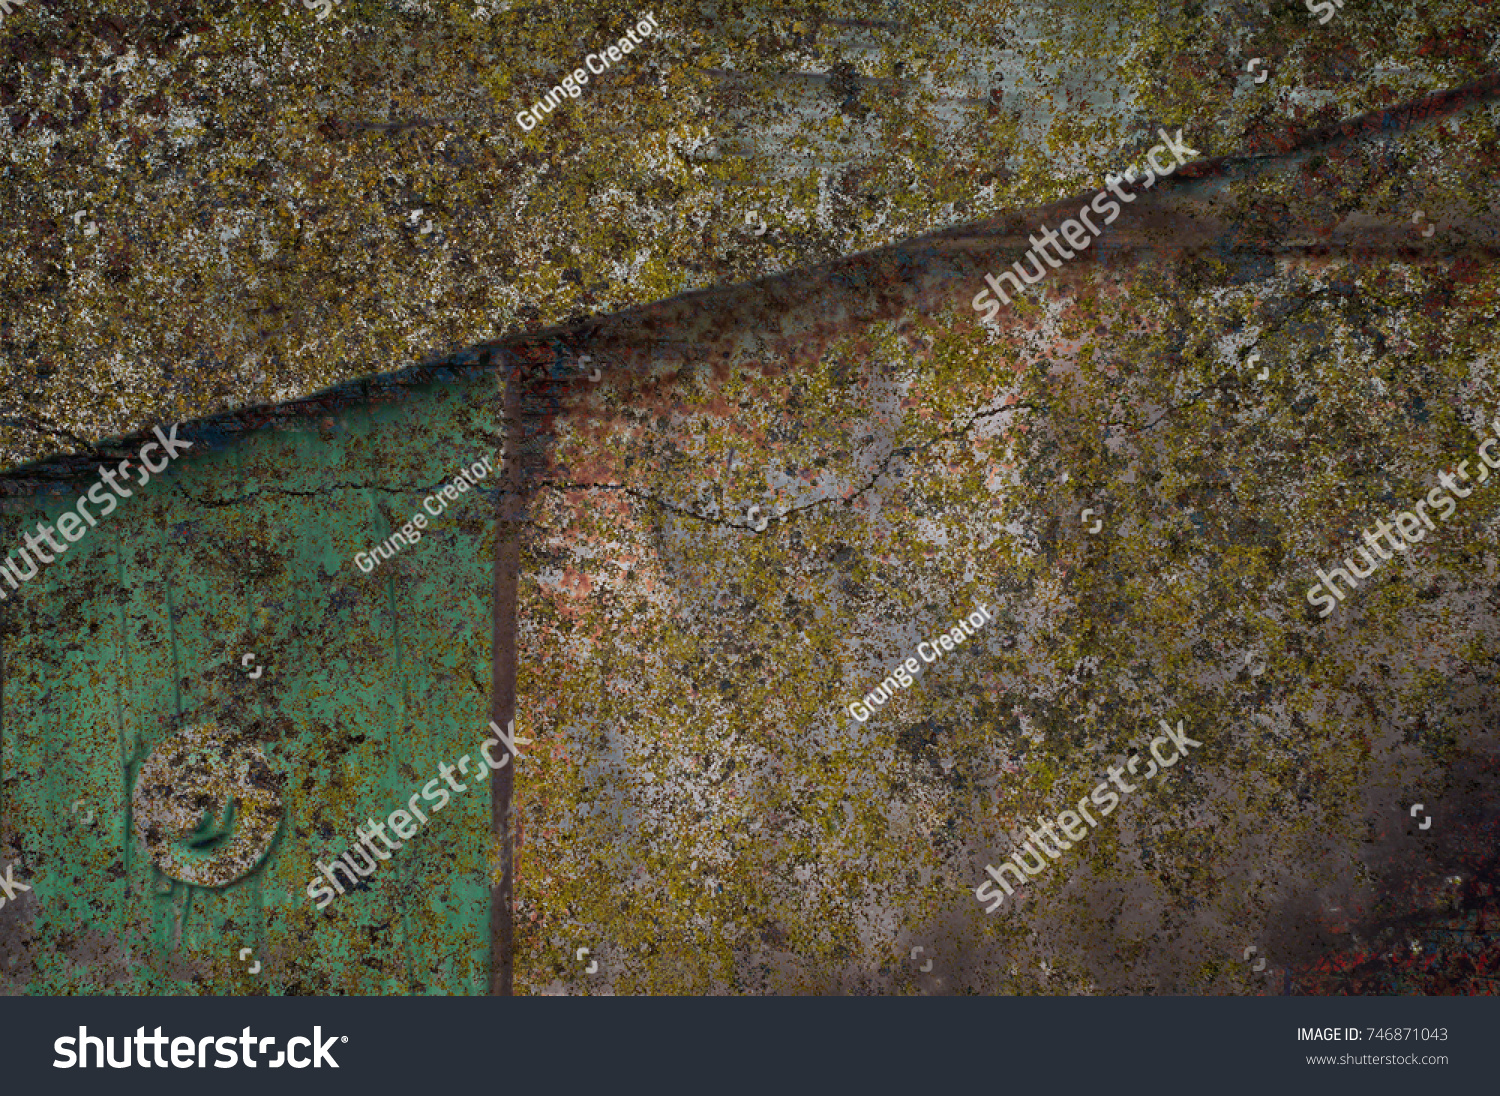 Abstract multicolor grunge background with abstract colored texture. Various color pattern elements. Old  vintage scratches, stain, paint splats, brush strokes, dots, spots. Weathered wall backdrop #746871043